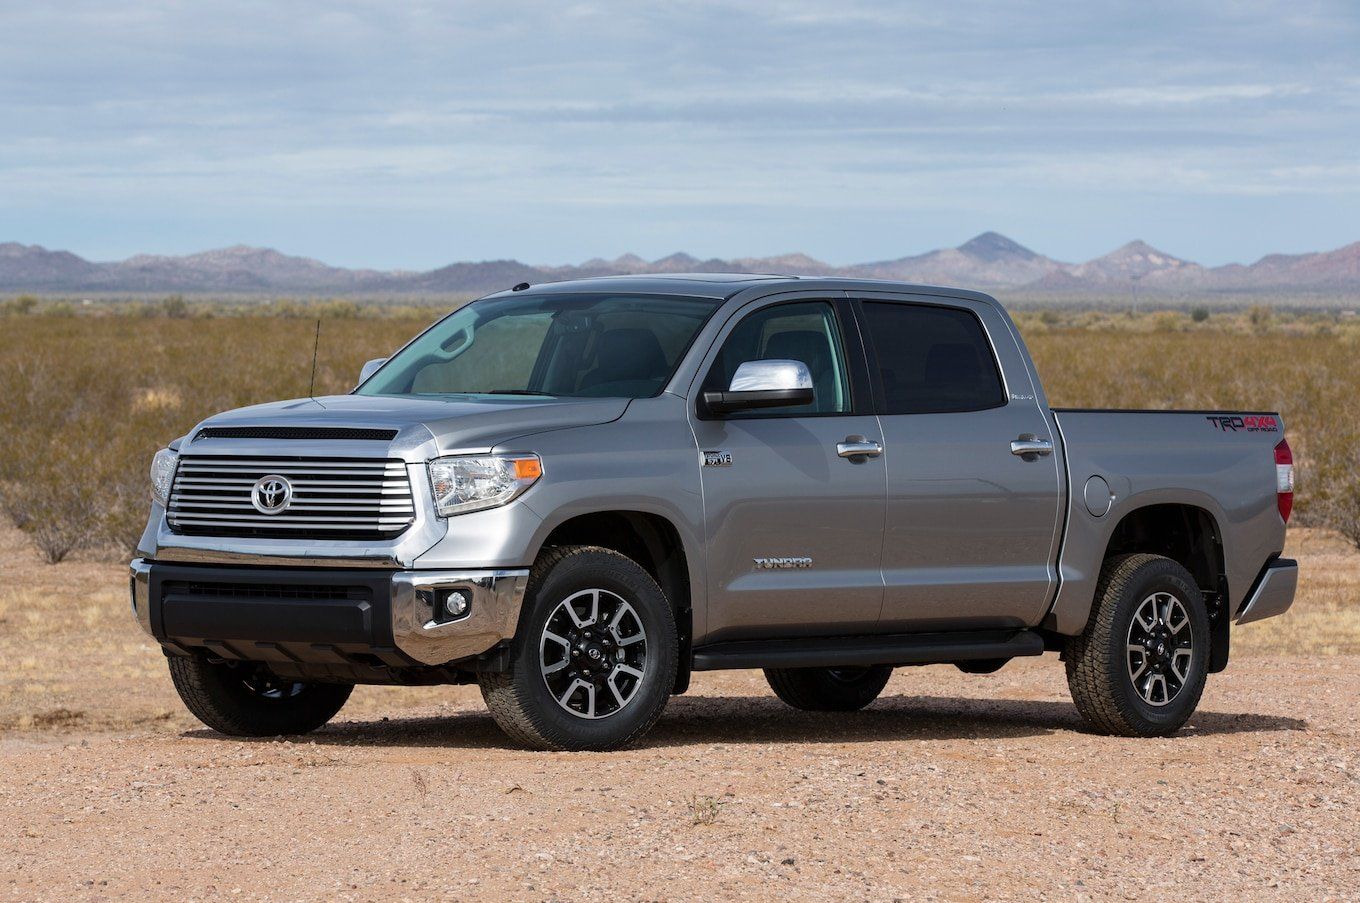 2014-Toyota-Tundra-Limited-TRD-4x4-Off-Road-front-view.jpg